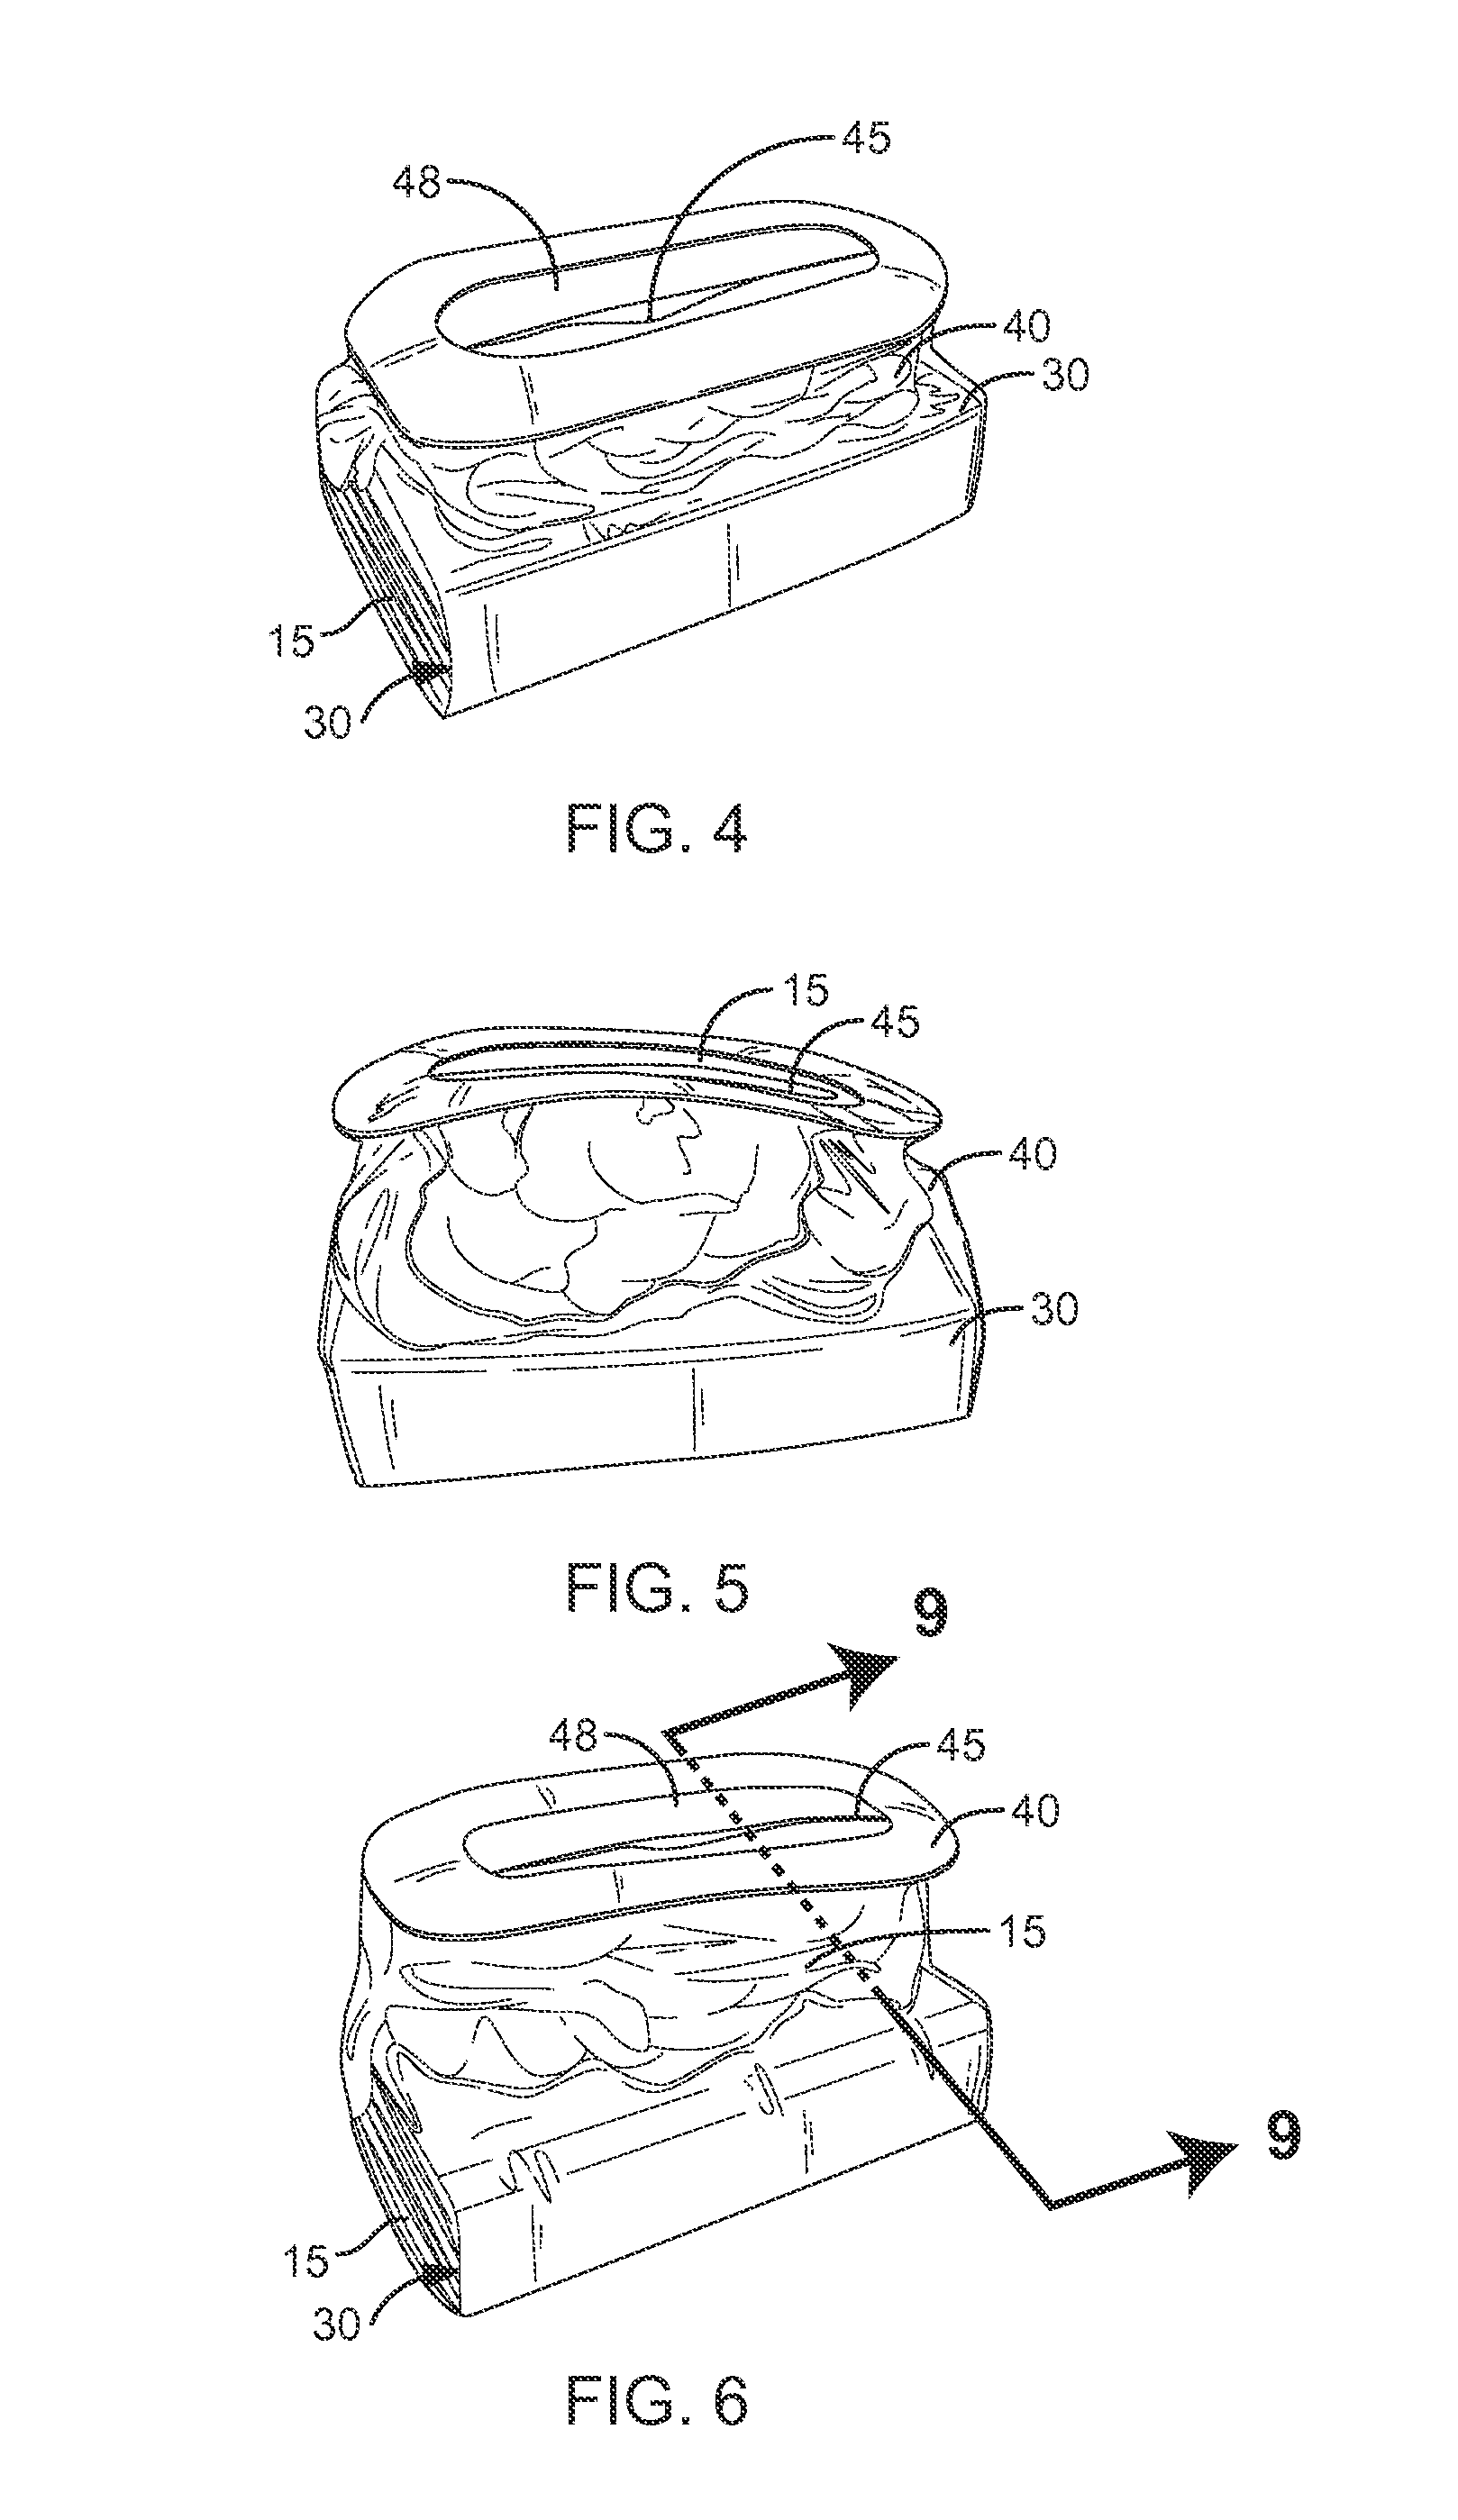 Combination Tissue Dispenser and Trash Receptacle